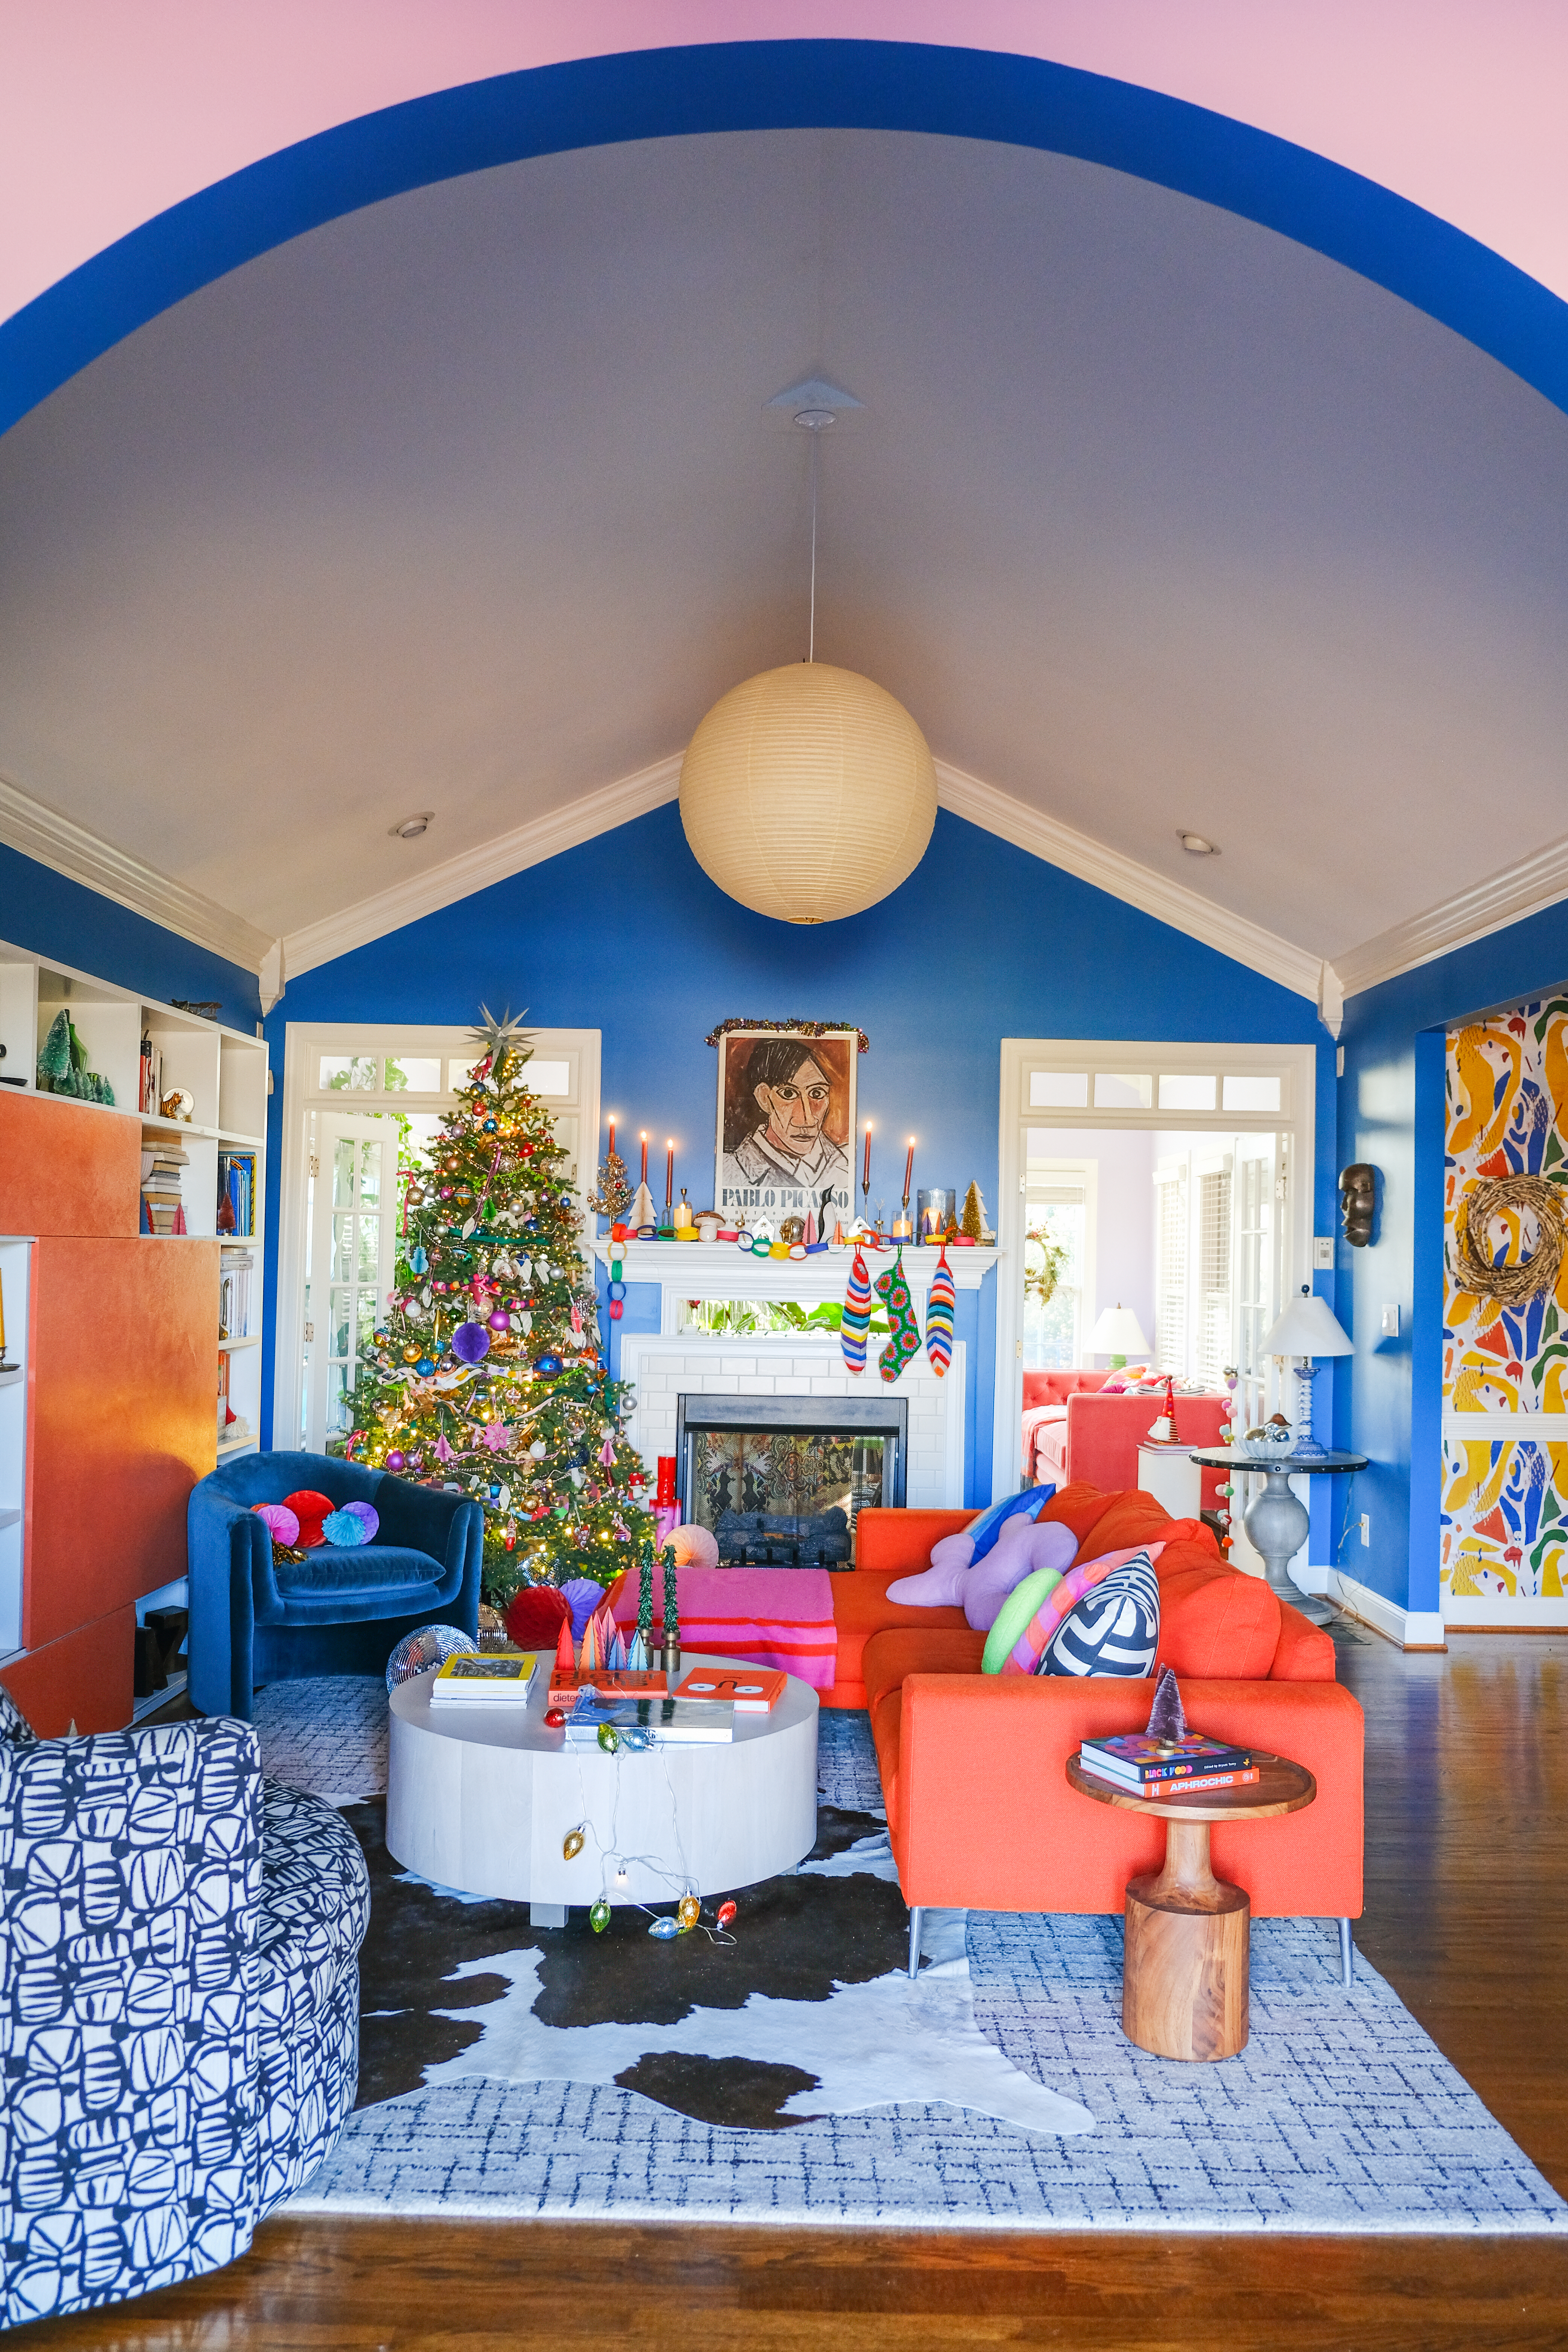 Christmas decor in colorful living room